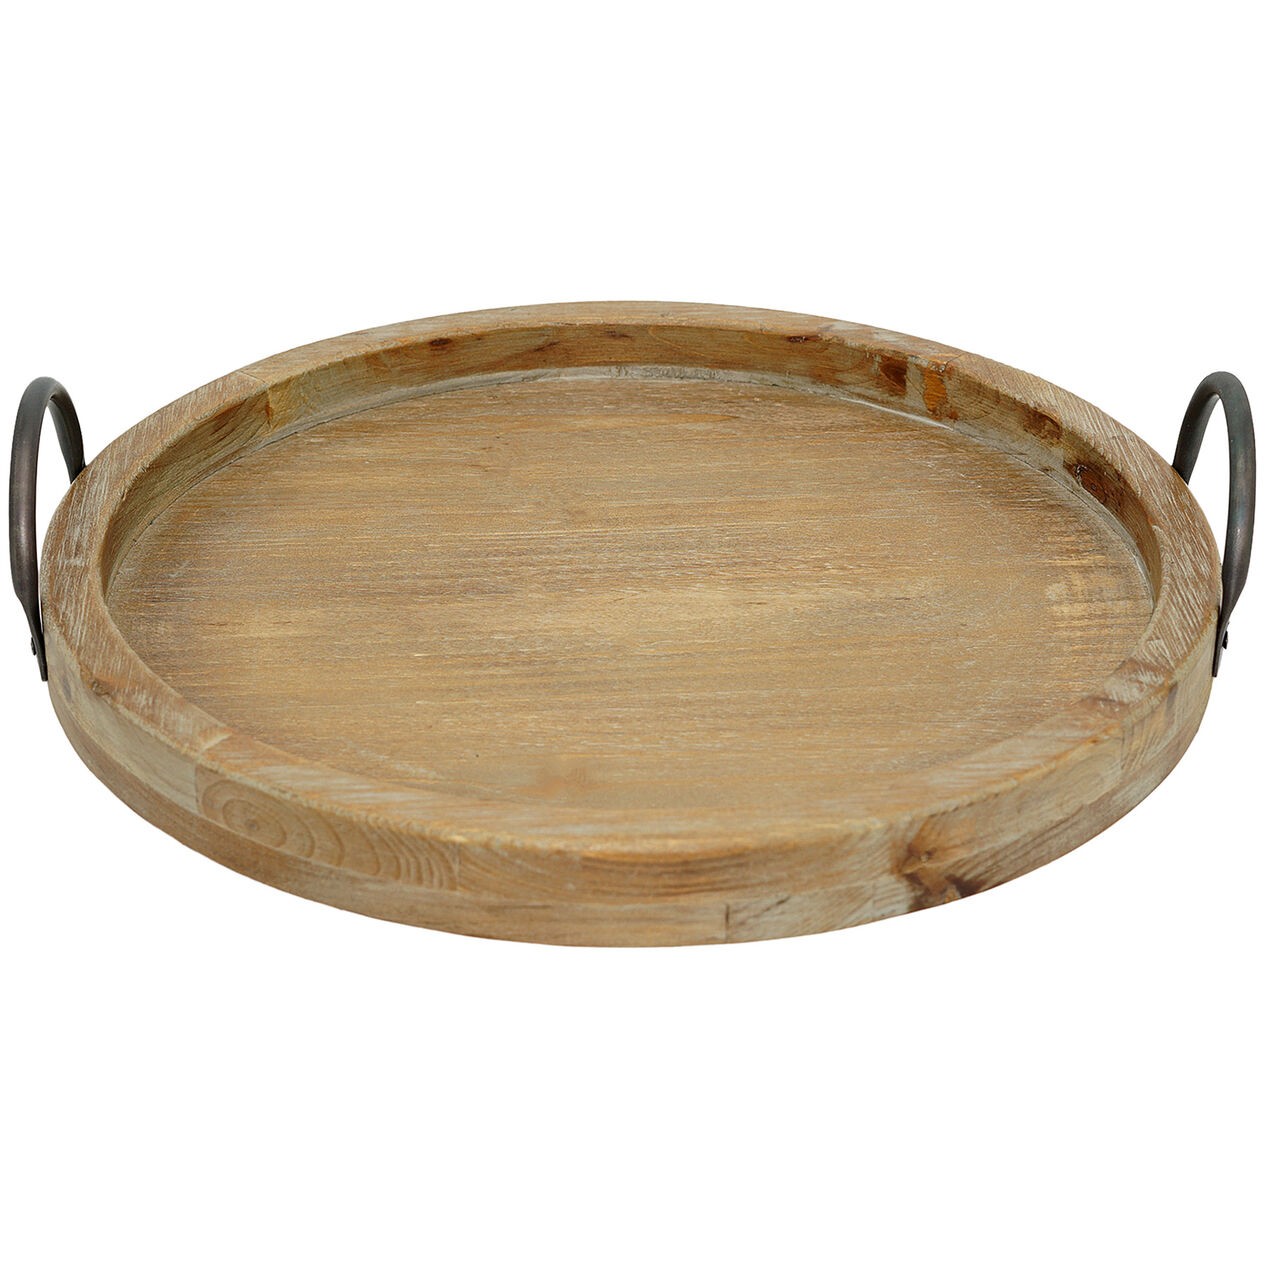 Round wooden tray with metal handles 15 at home